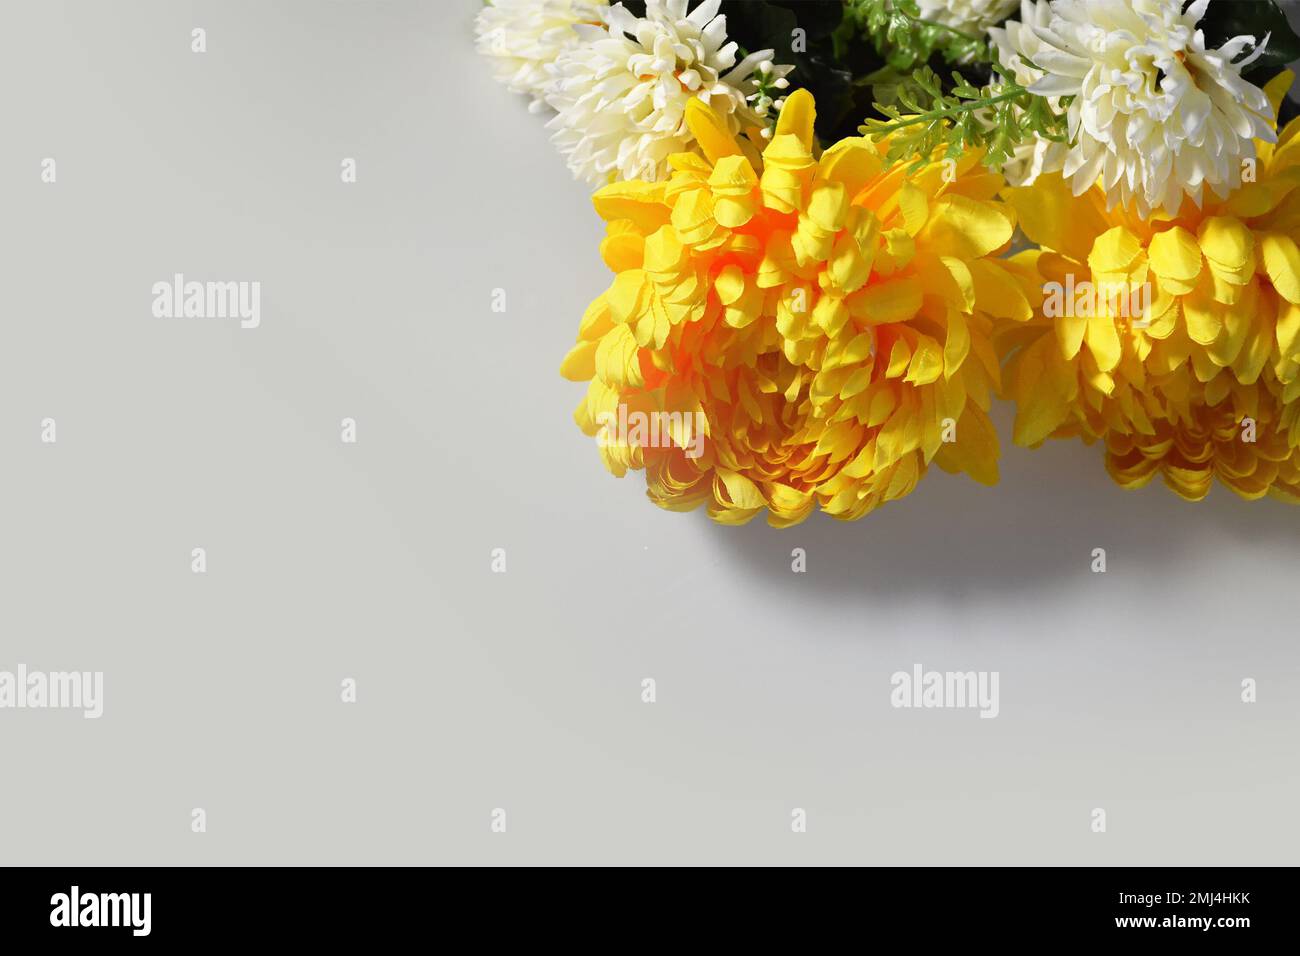 Sympathy card with chrysanthemum flowers and copy space. Condolence background concept. Stock Photo